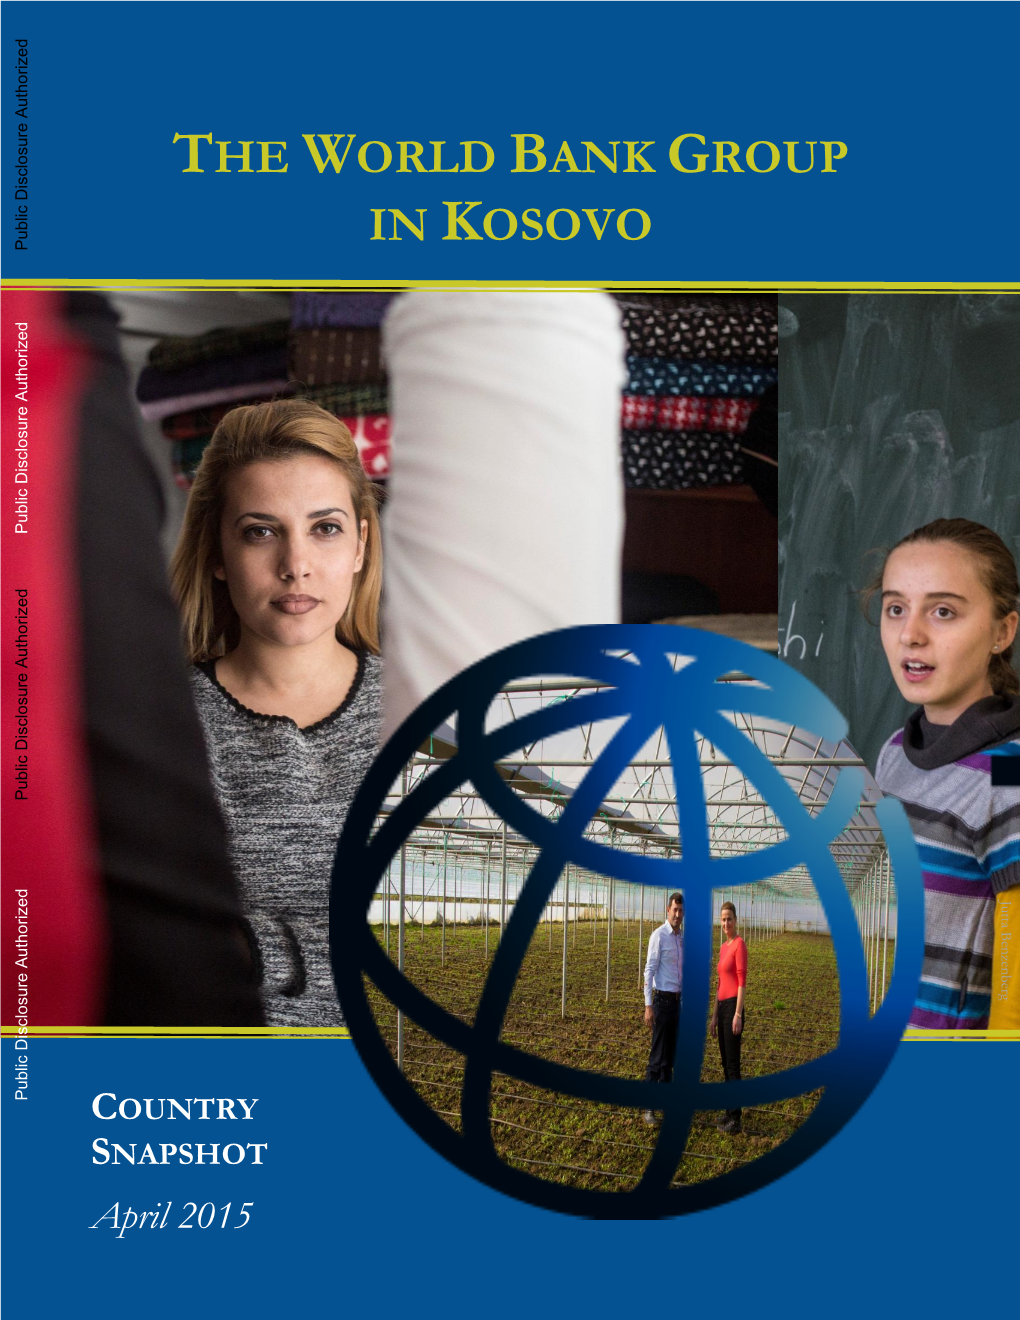 THE WORLD BANK GROUP in KOSOVO COUNTRY SNAPSHOT April 2015